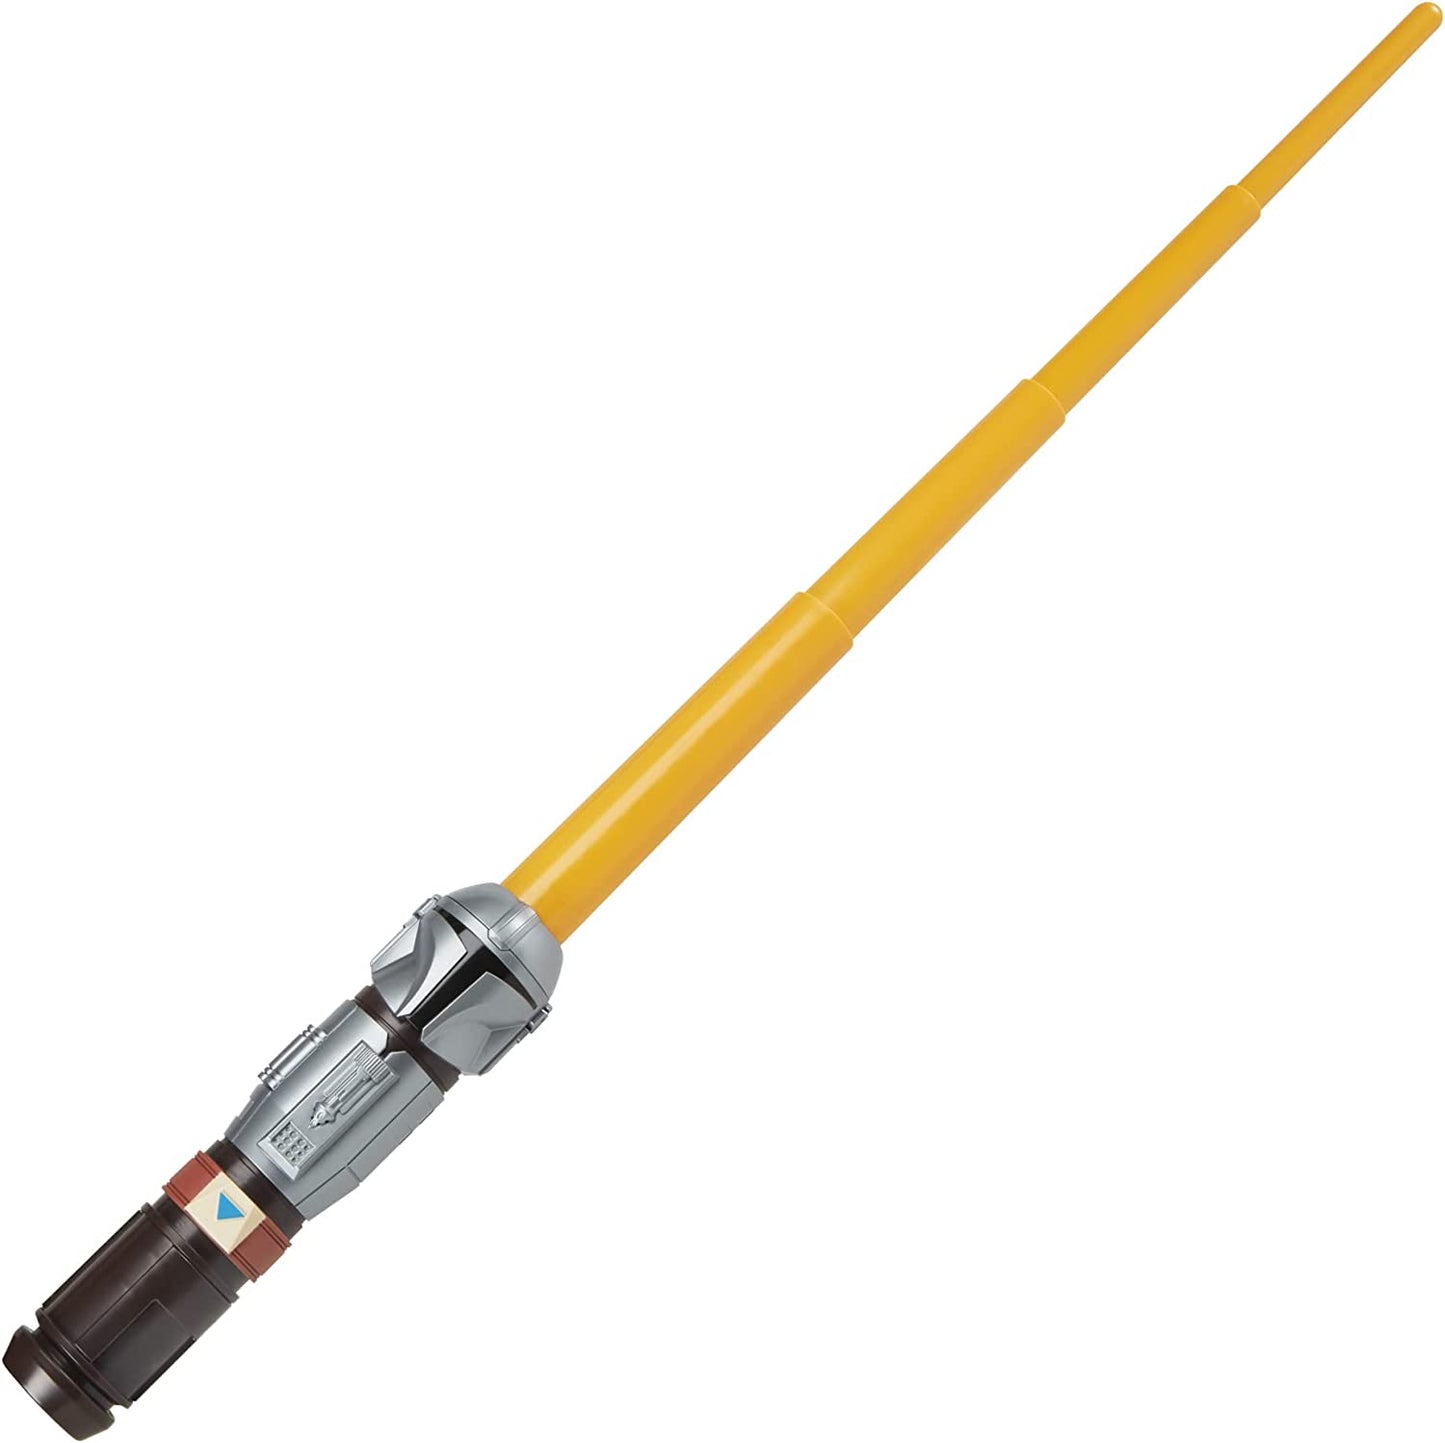 Star Wars Lightsaber Squad The Mandalorian Extendable Orange Lightsaber Roleplay Toy for Kids Ages 4 and Up, Multicolored